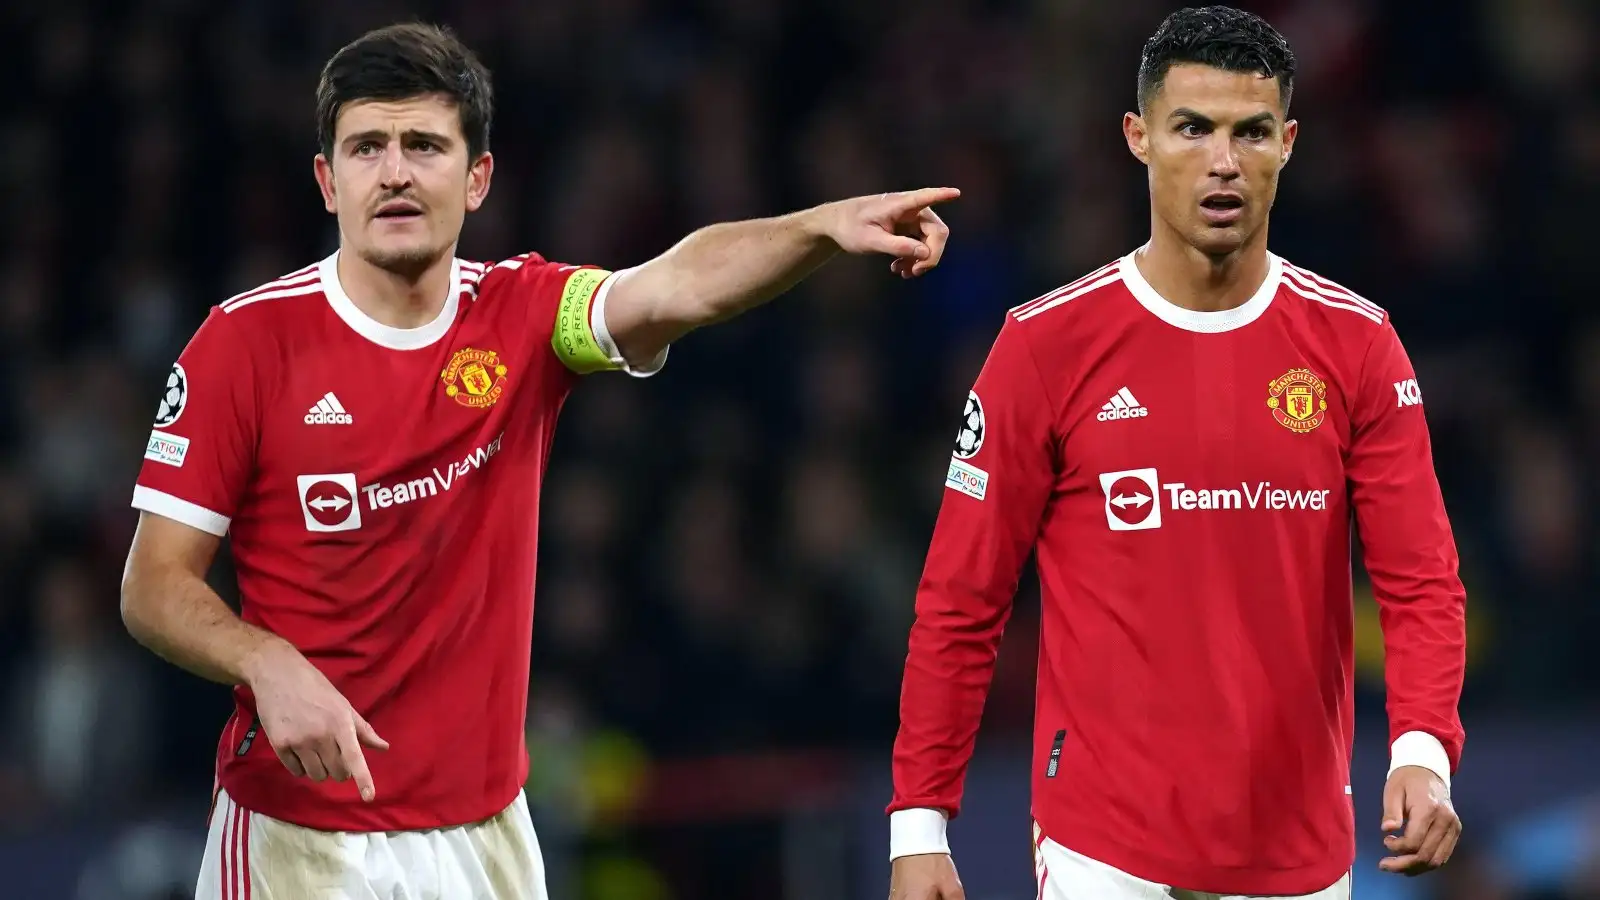 Harry Maguire and Cristiano Ronaldo in action for Manchester United.